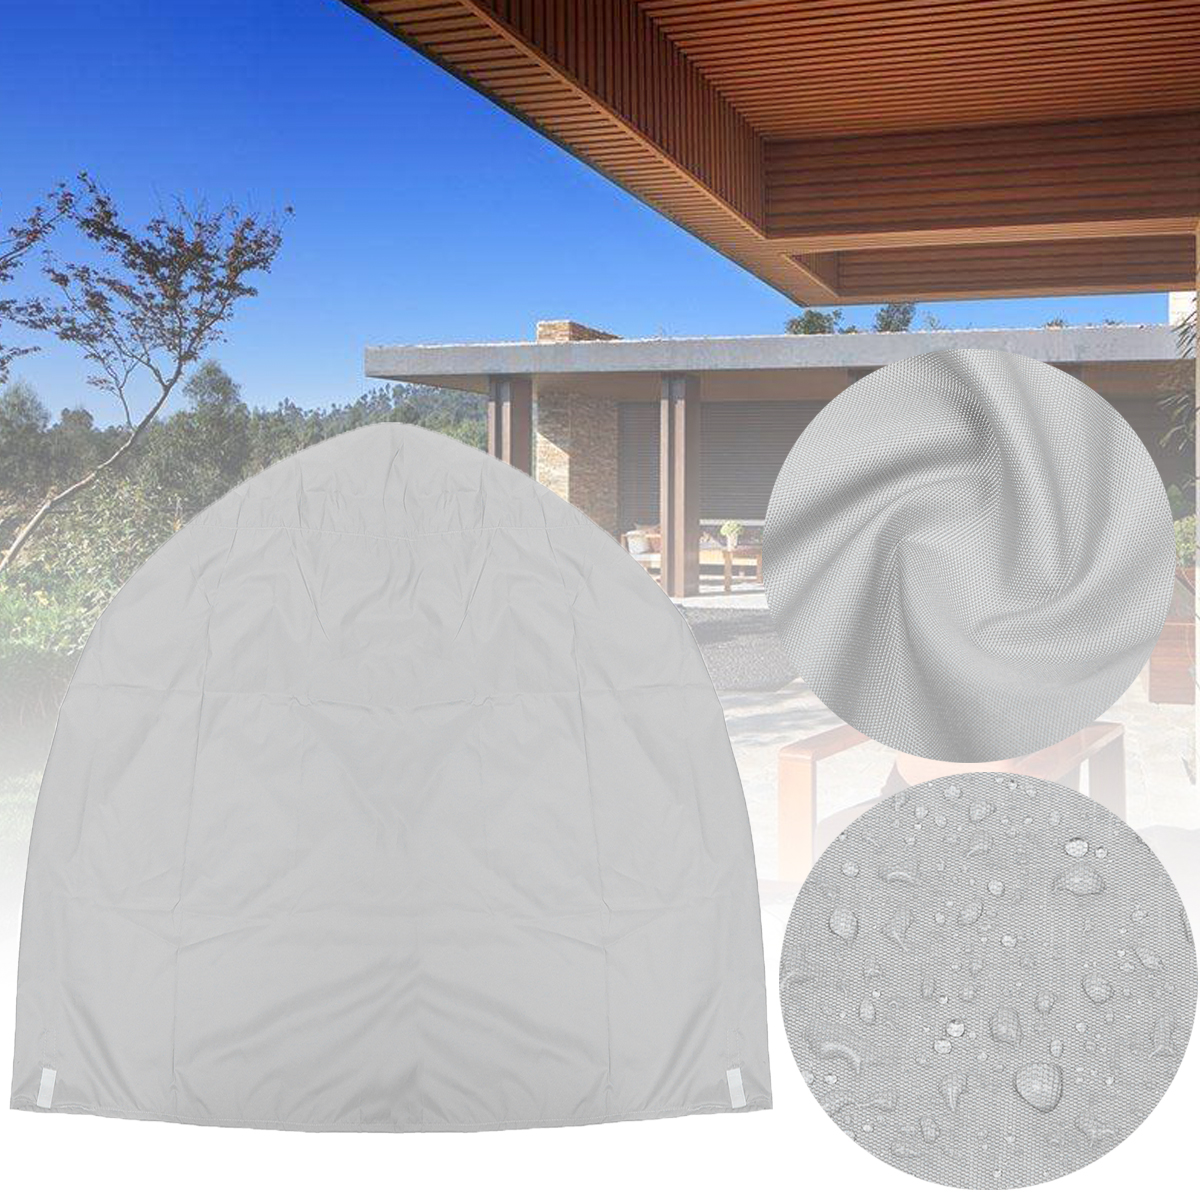 

73x60x89cm BBQ Grill Cover Outdoor Camping Picnic Waterproof Dust Rain UV Proof Protector Barbeque Accessories